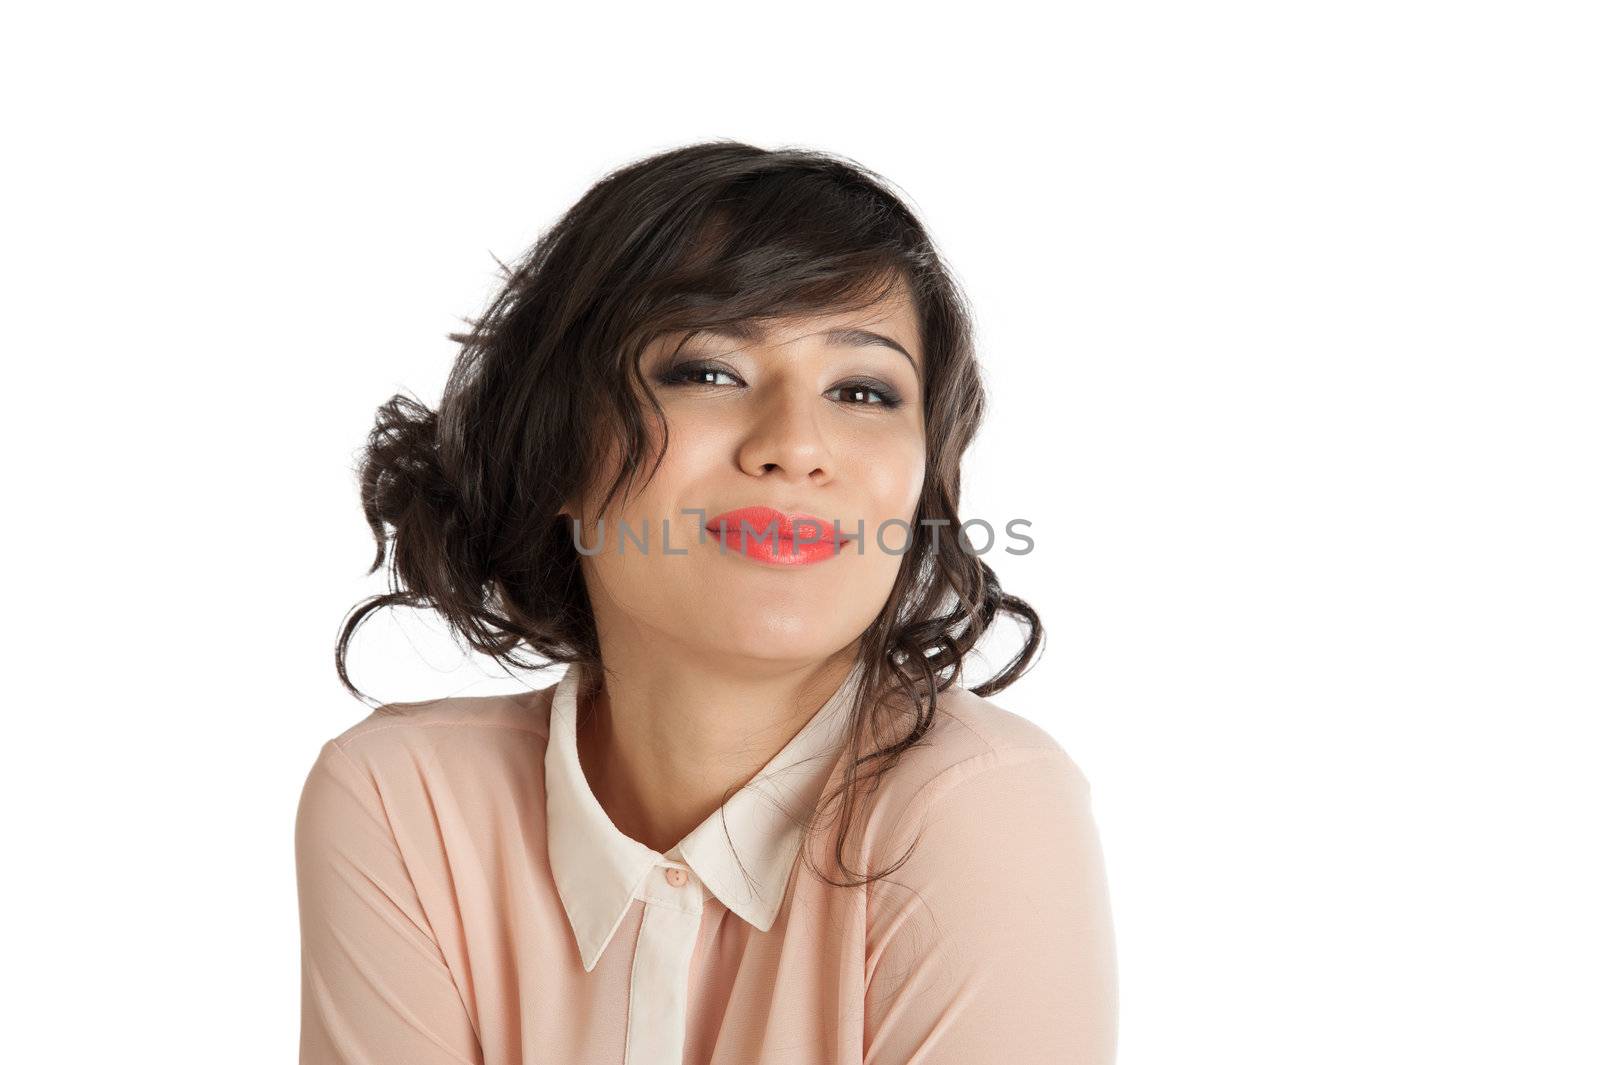 Portrait of a woman in a pink blouse on a white background isolated